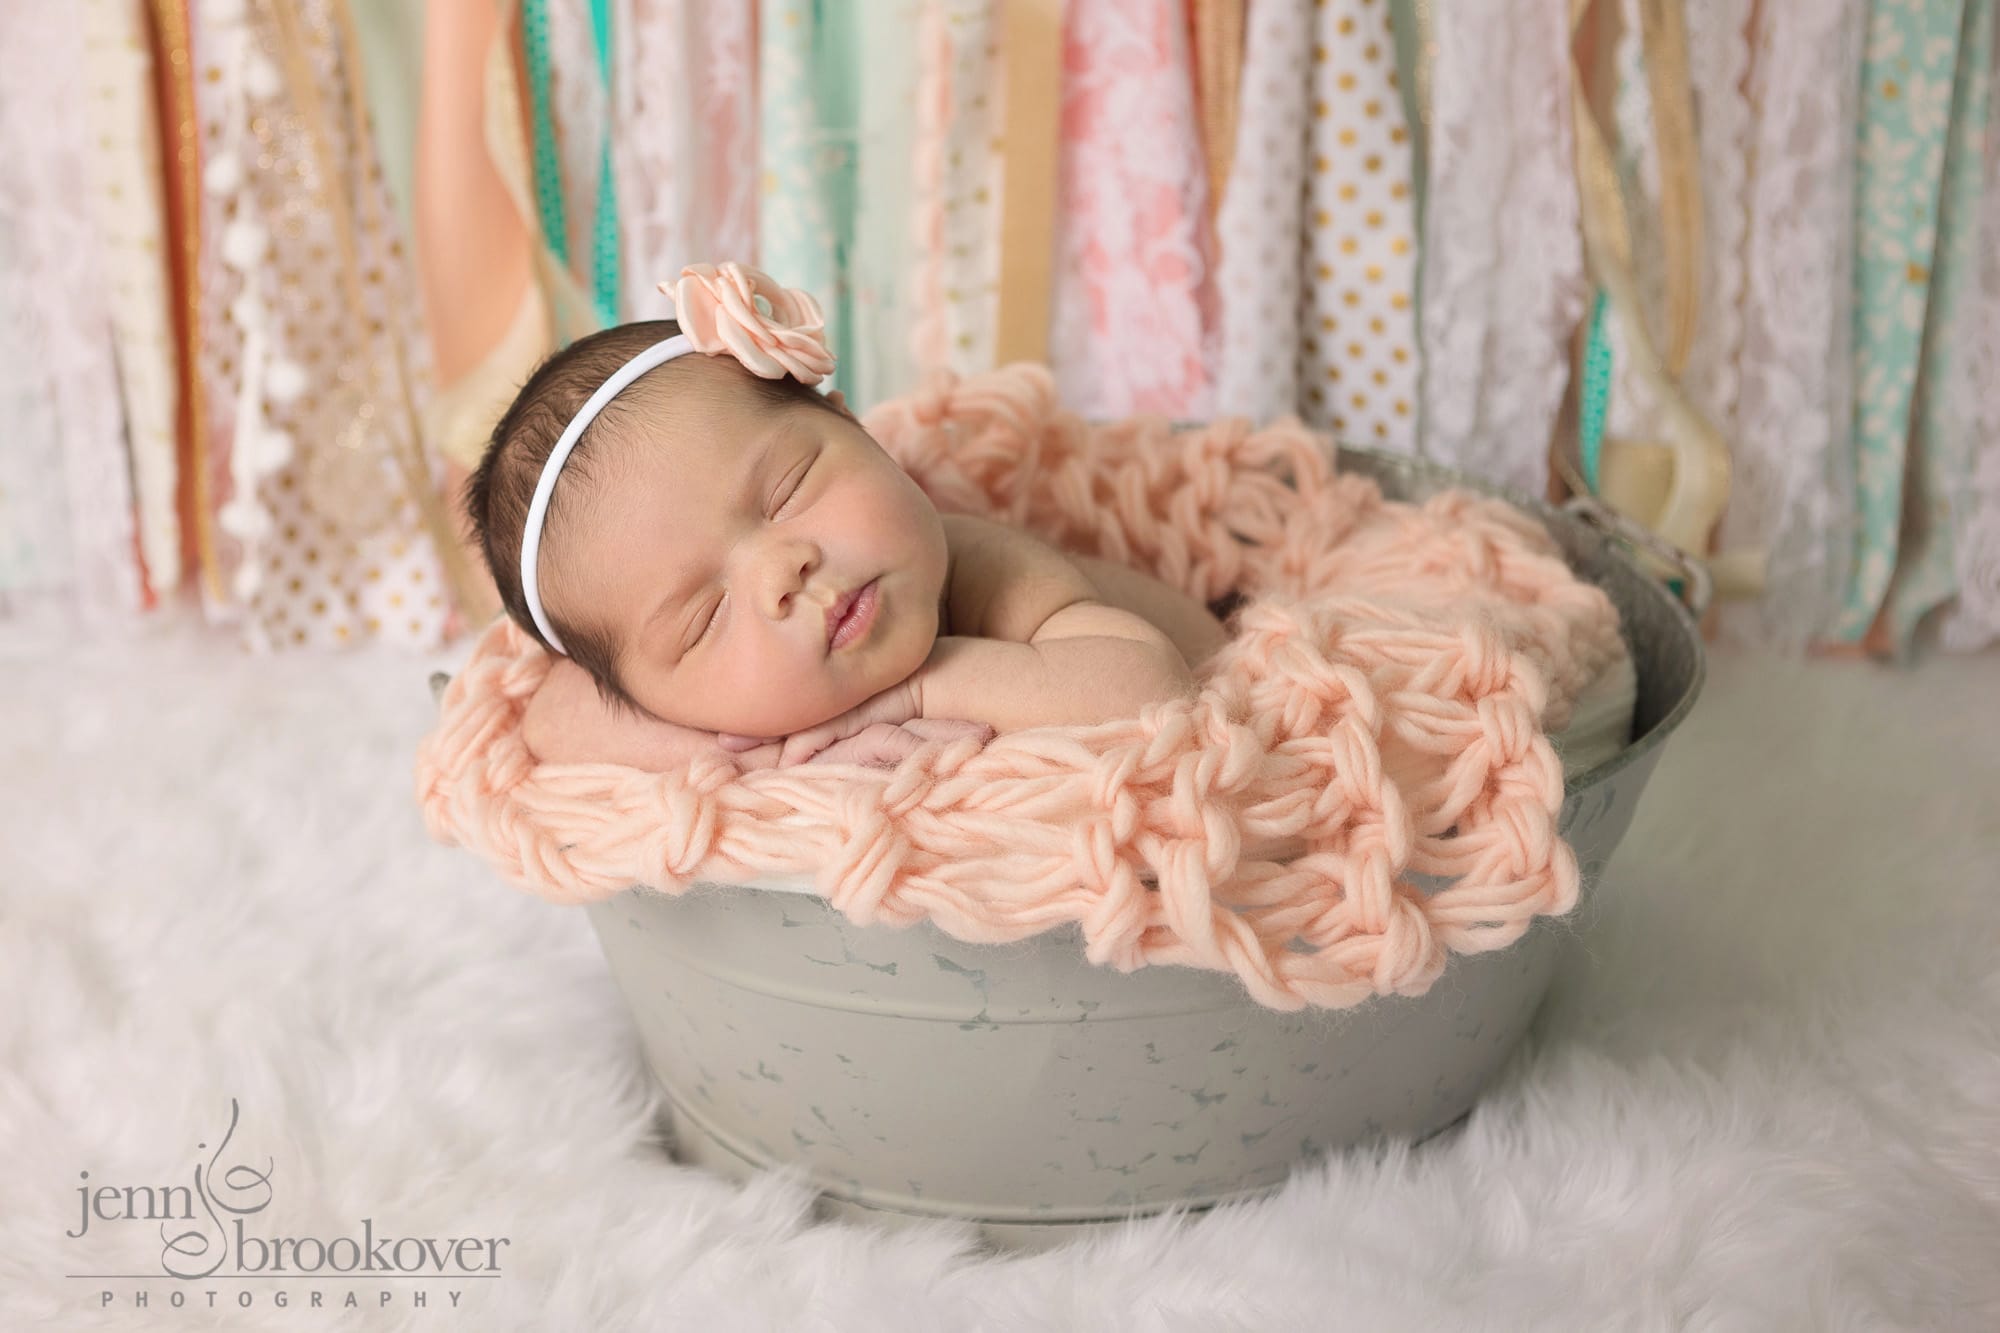 A baby girl is sleeping in a bucket with a pink bow.